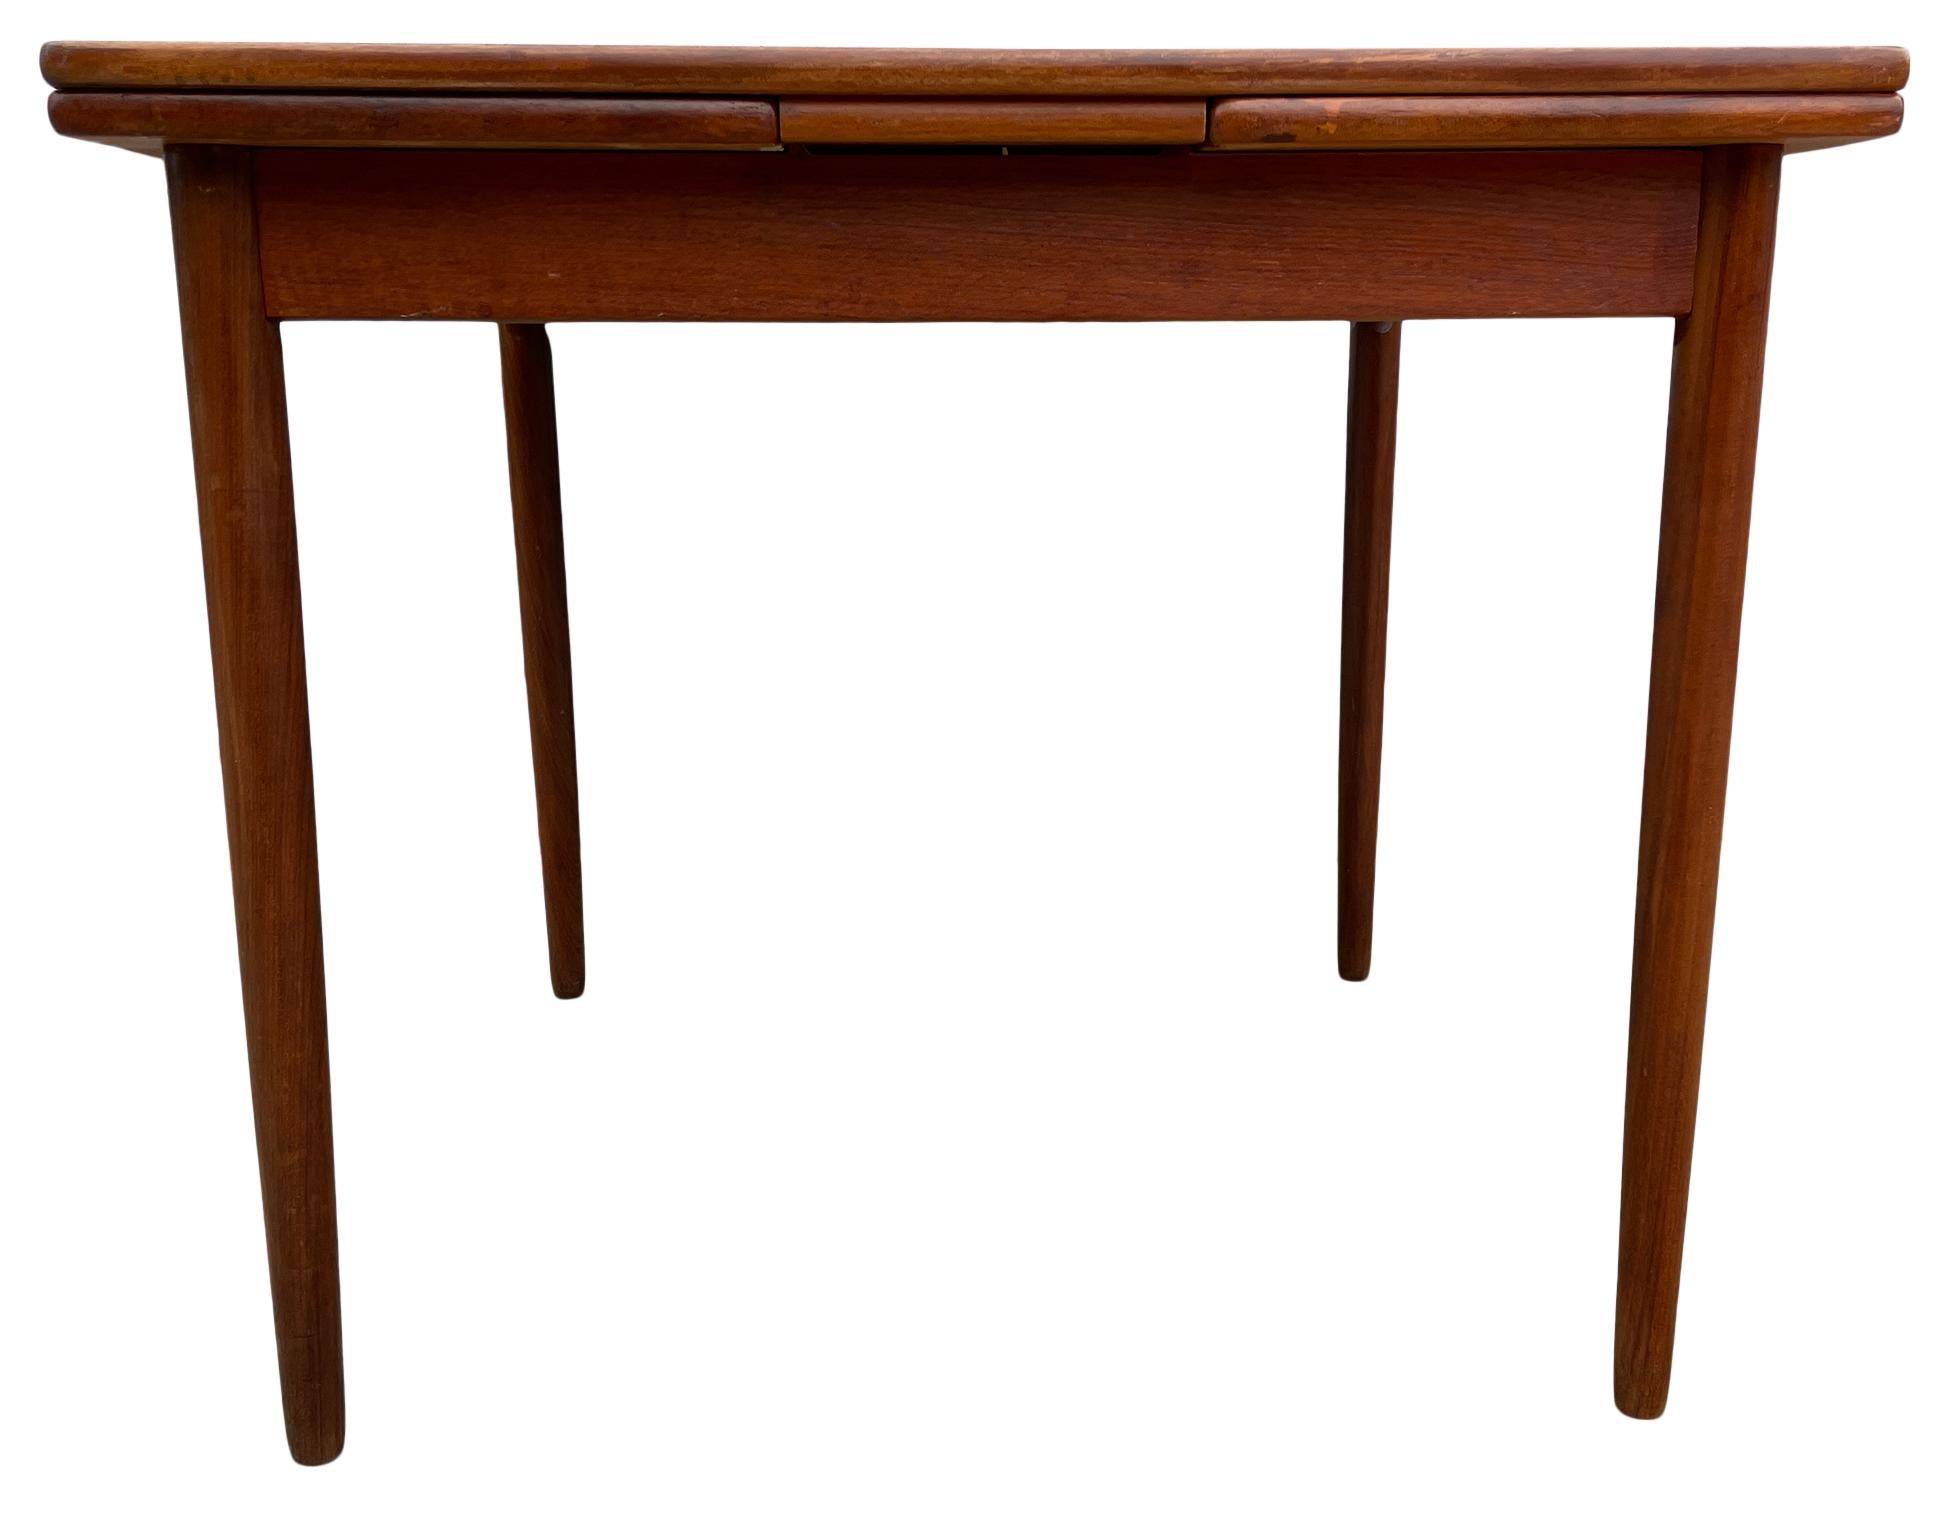 Mid century Danish modern teak small refectory extension dining table. Made in Denmark 
Great vintage condition - All Legs unbolt. Great for small spaces.

Table is square 33